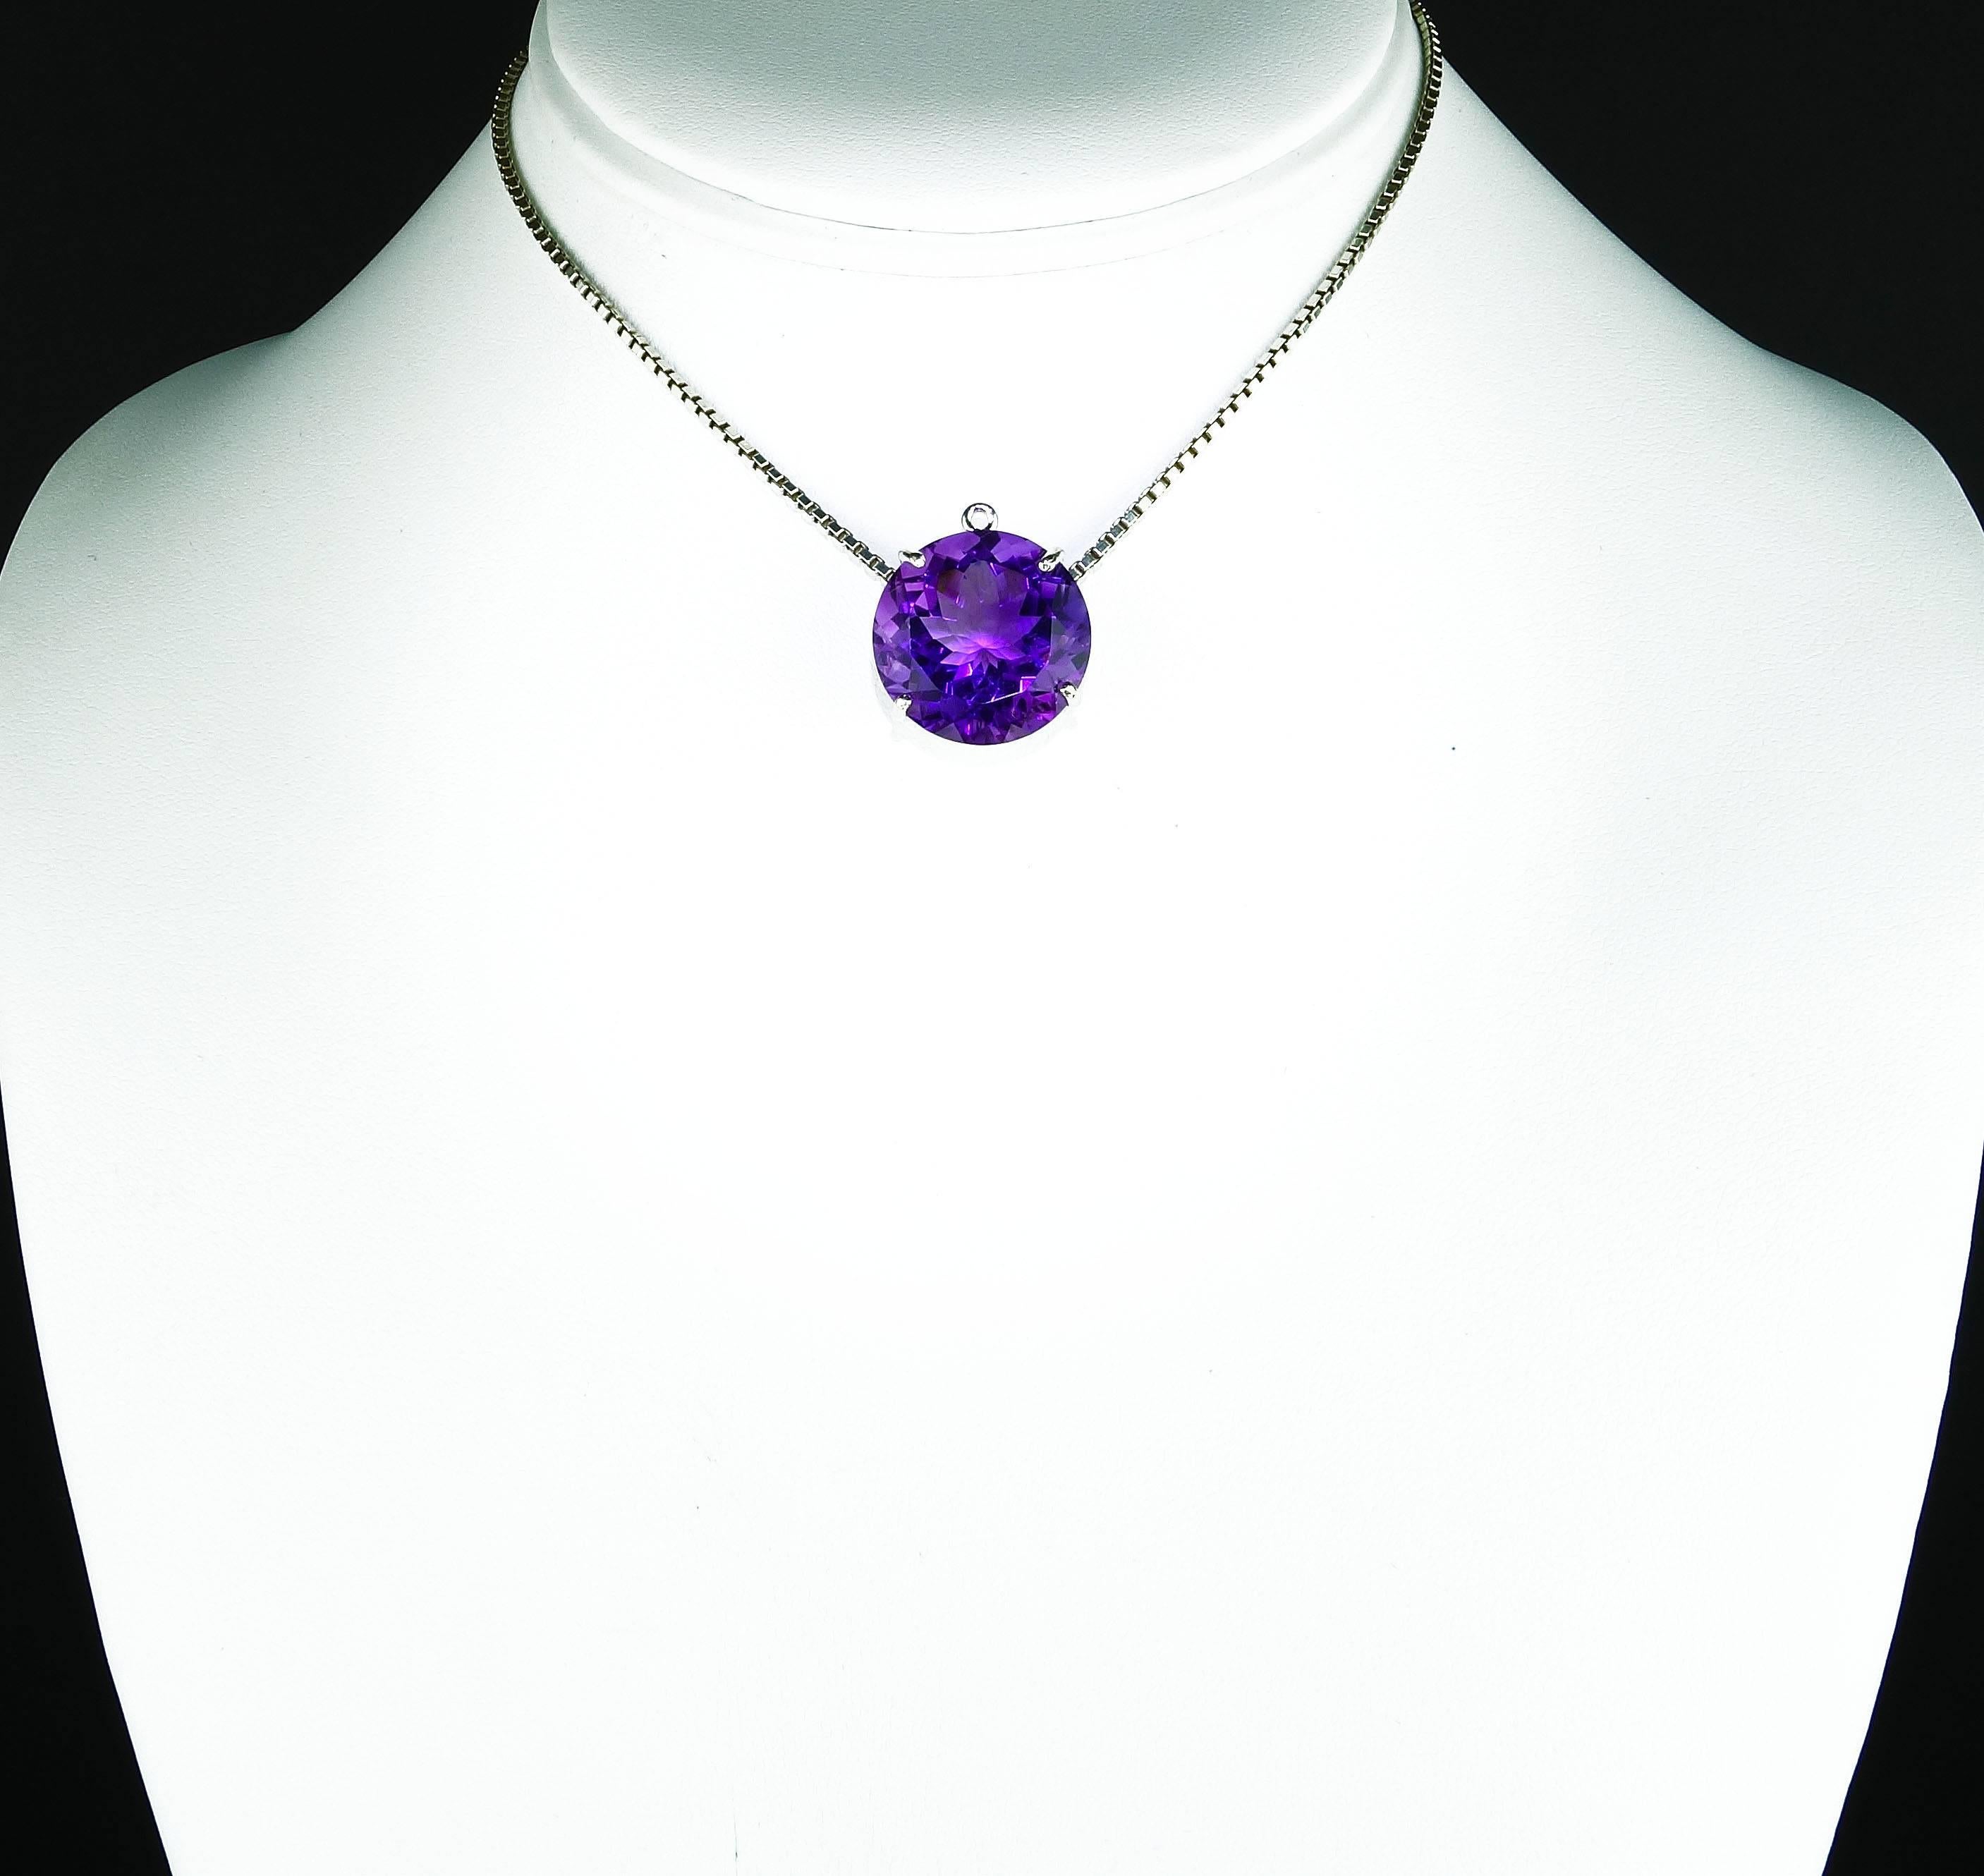 Brilliant 19.76 carat purple Amethyst with all the natural glittering pink flashes is 18 mm and is set in a Sterling Silver pendant.